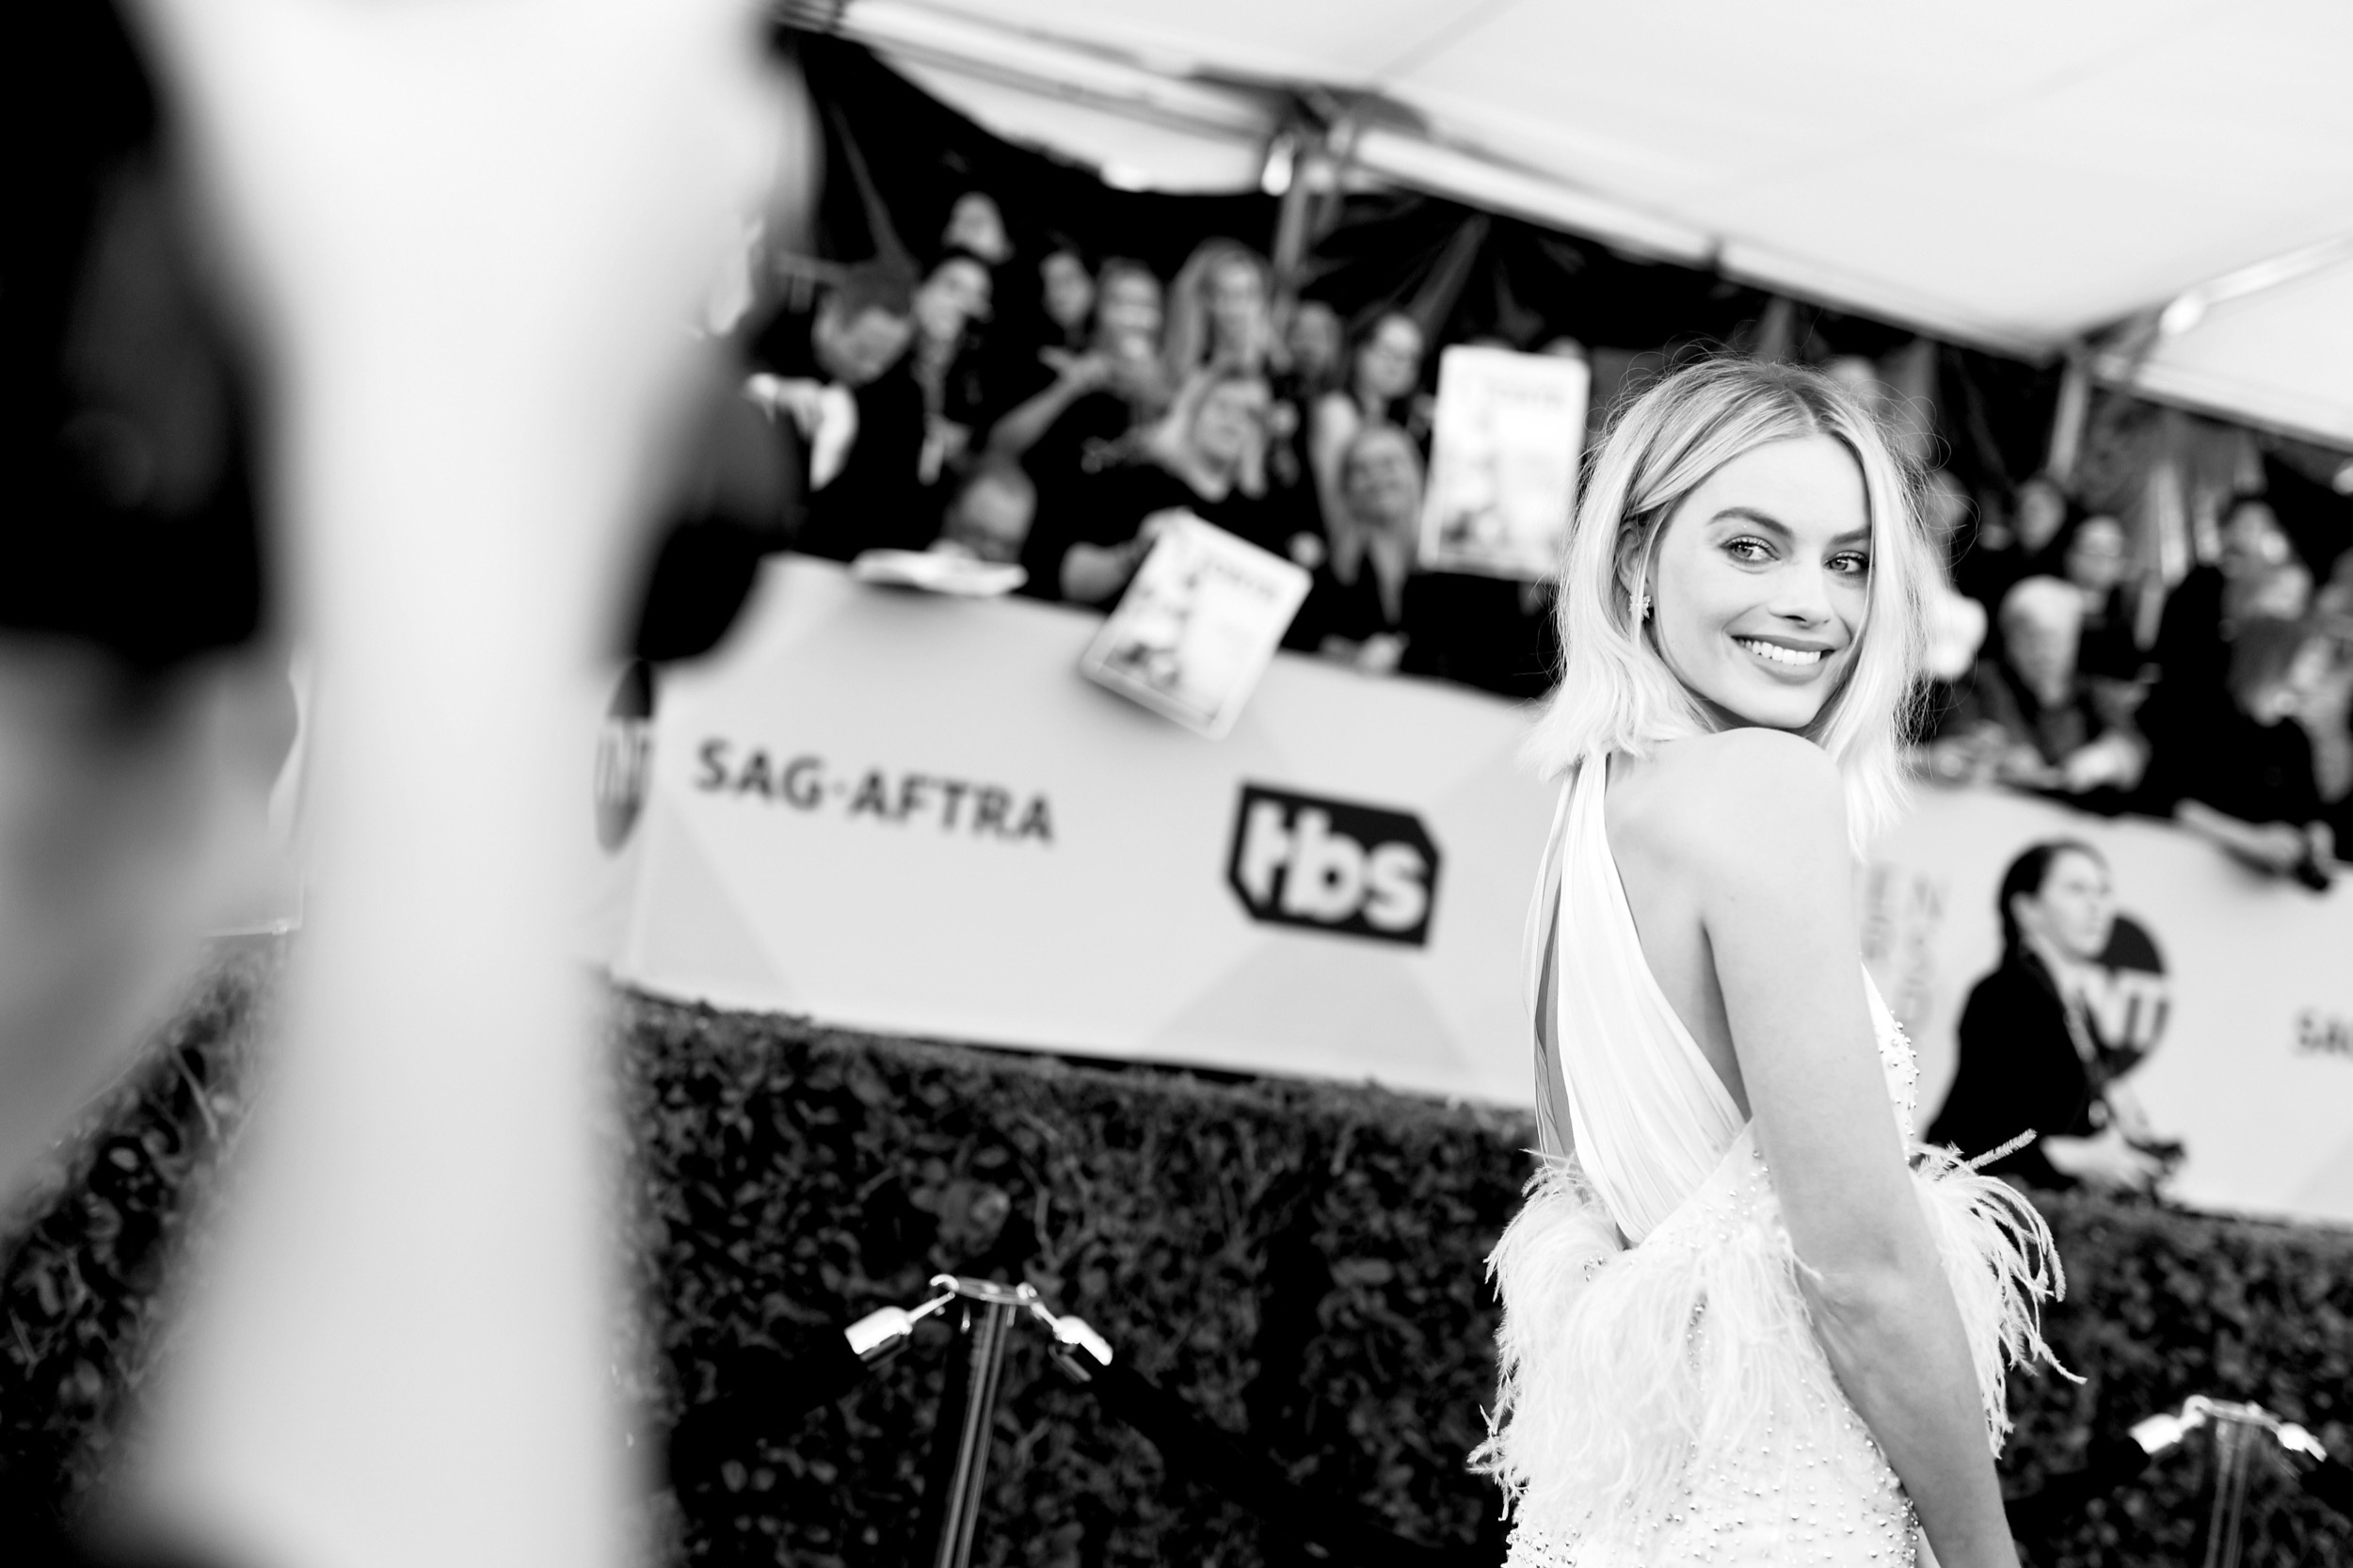 Jan 21 The 24th Annual Screen Actors Guild Awards Arrivals 087 Simply Margot Robbie 